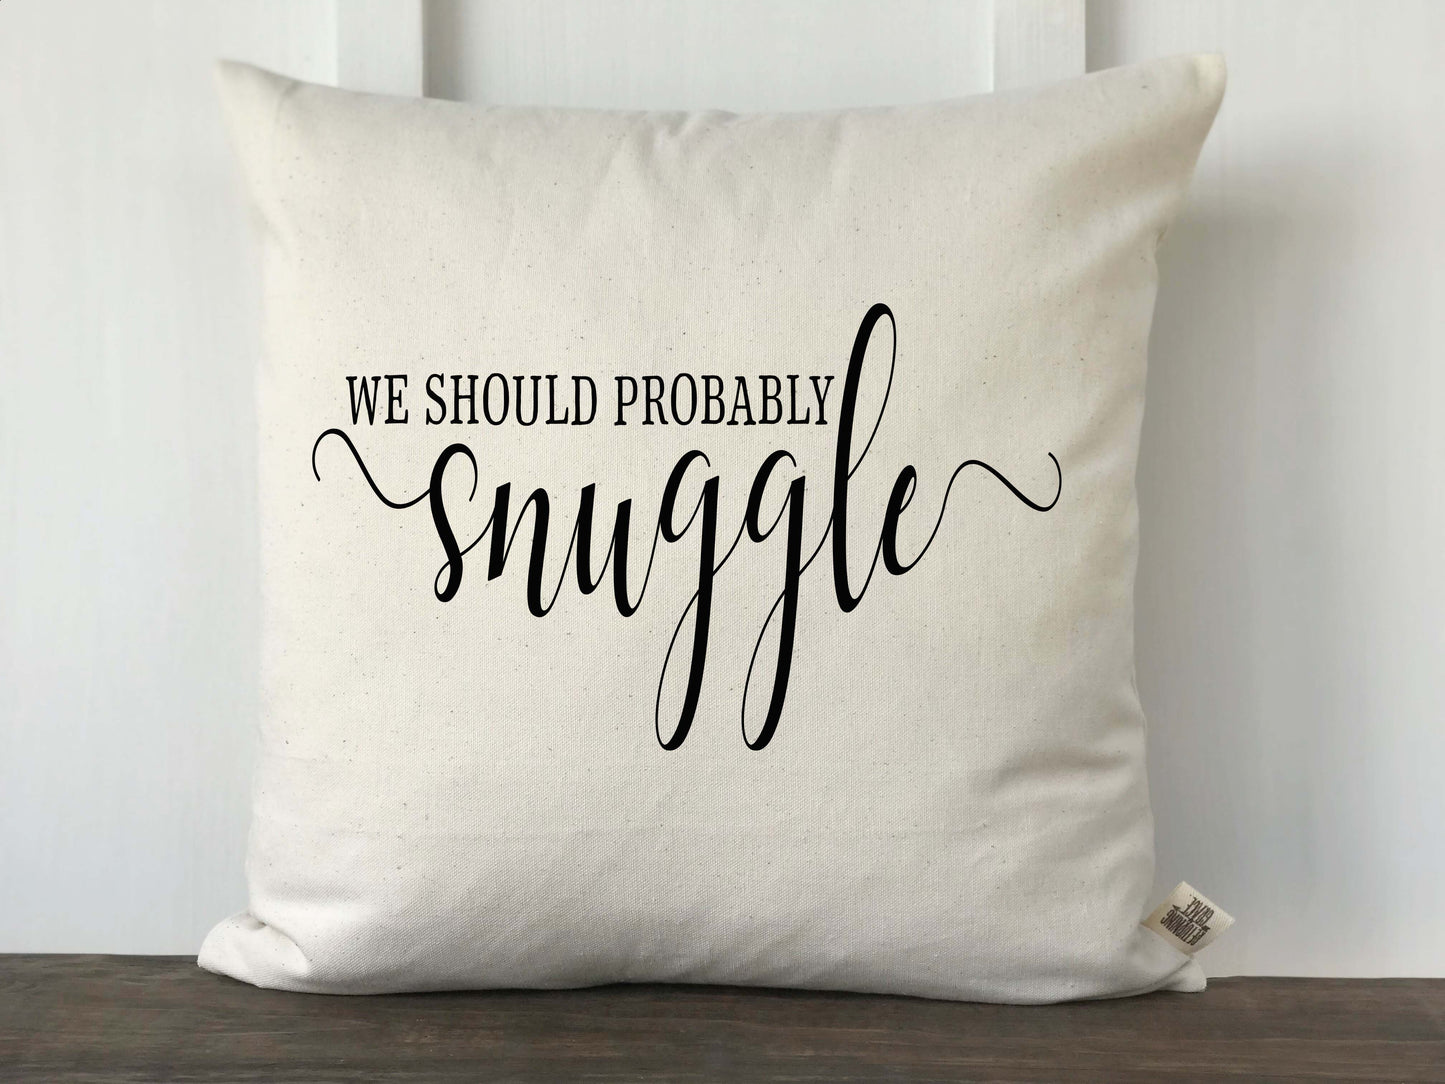 We Should Probably Snuggle Pillow Cover - Returning Grace Designs